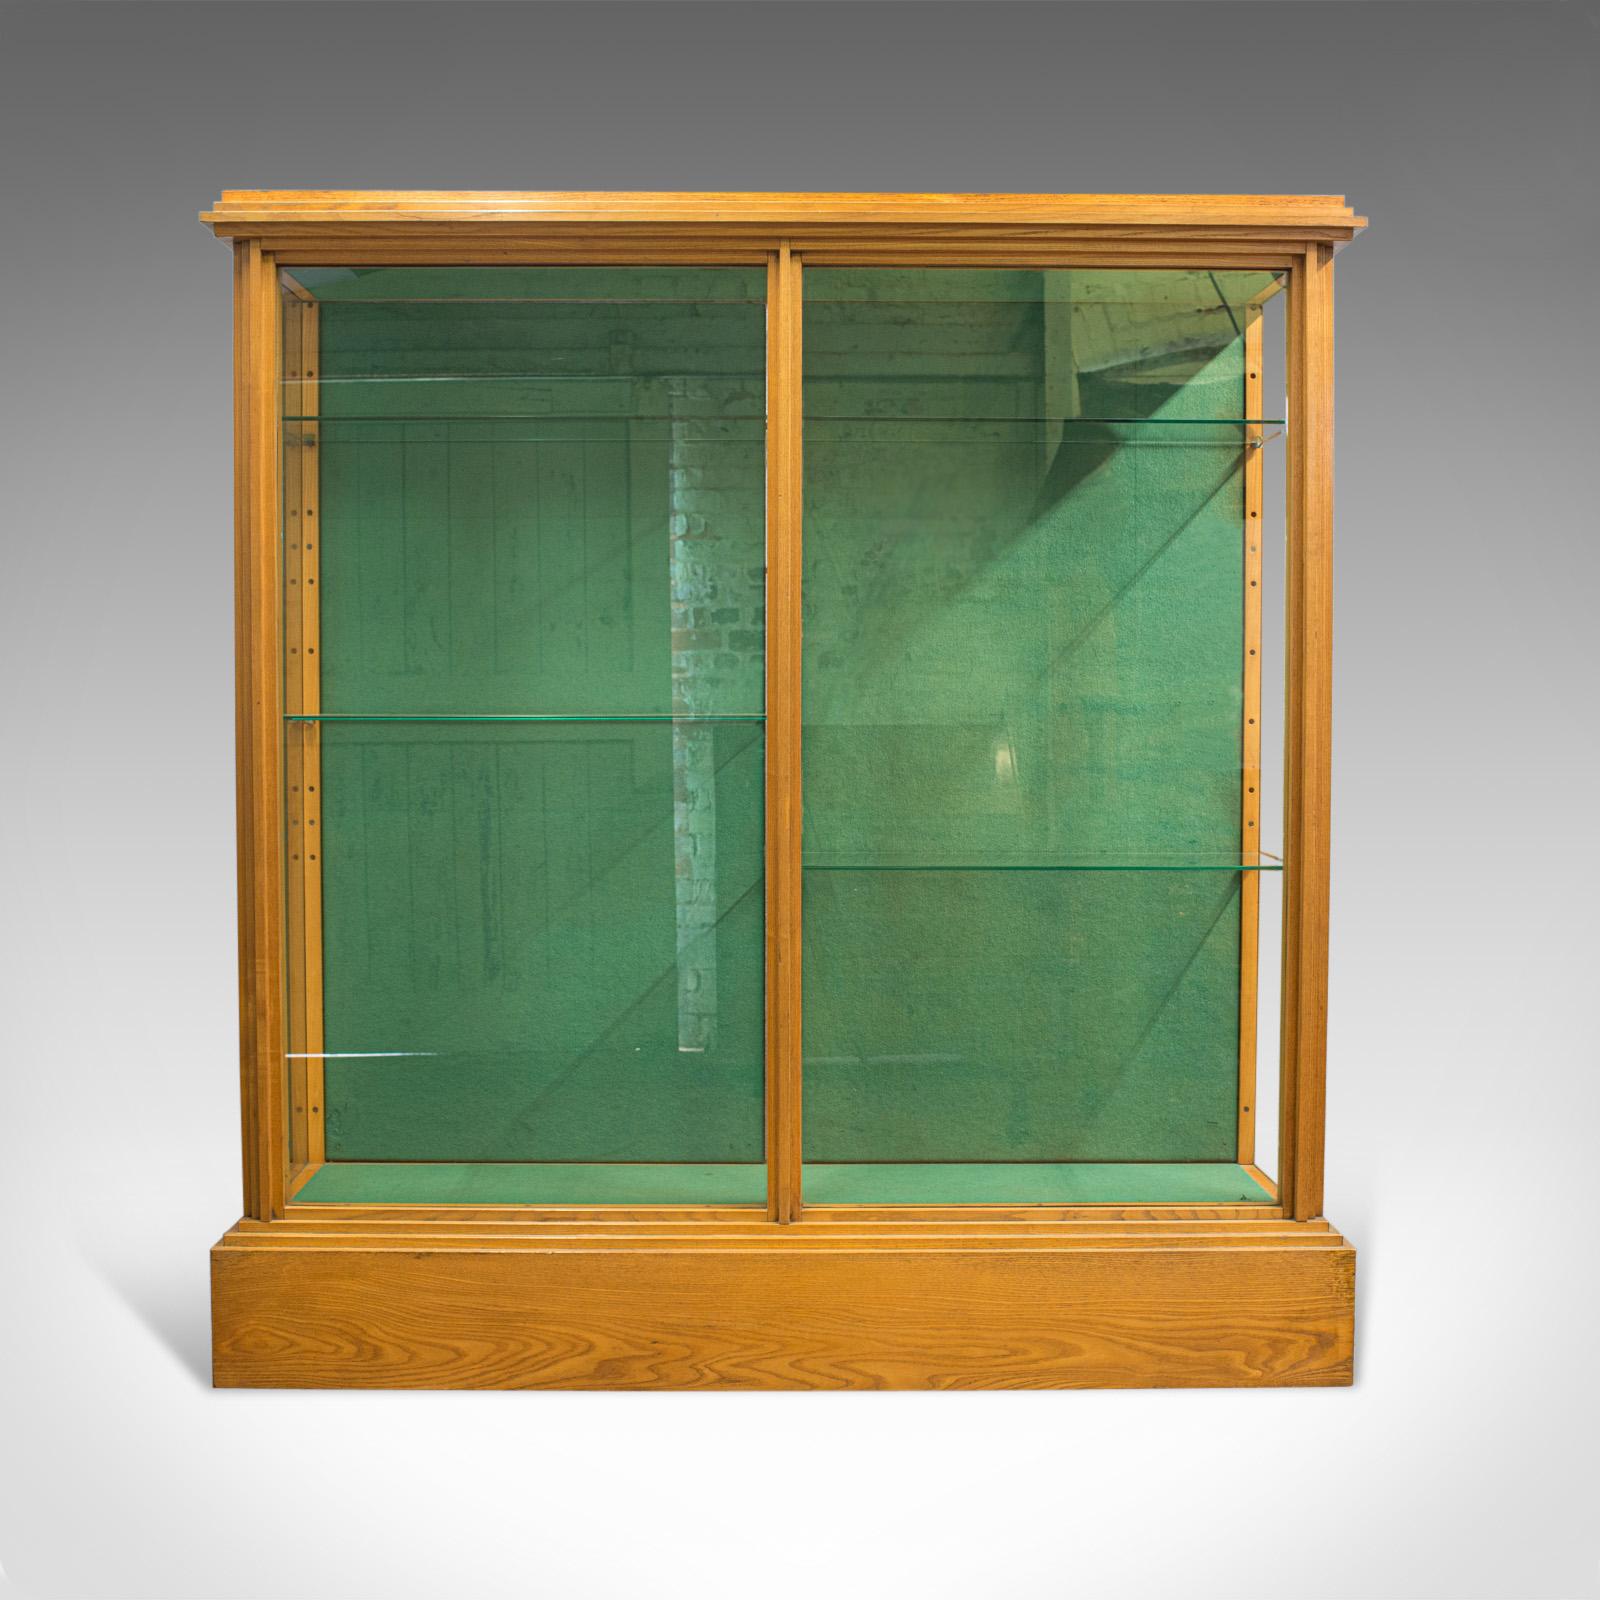 This is an antique shop display cabinet. An English, Victorian ash showcase shop fitting dating to the late 19th century, circa 1900.

Select ash gives an air of commercial purpose, typical of Victorian stores
Showing wonderful biscuits hues with